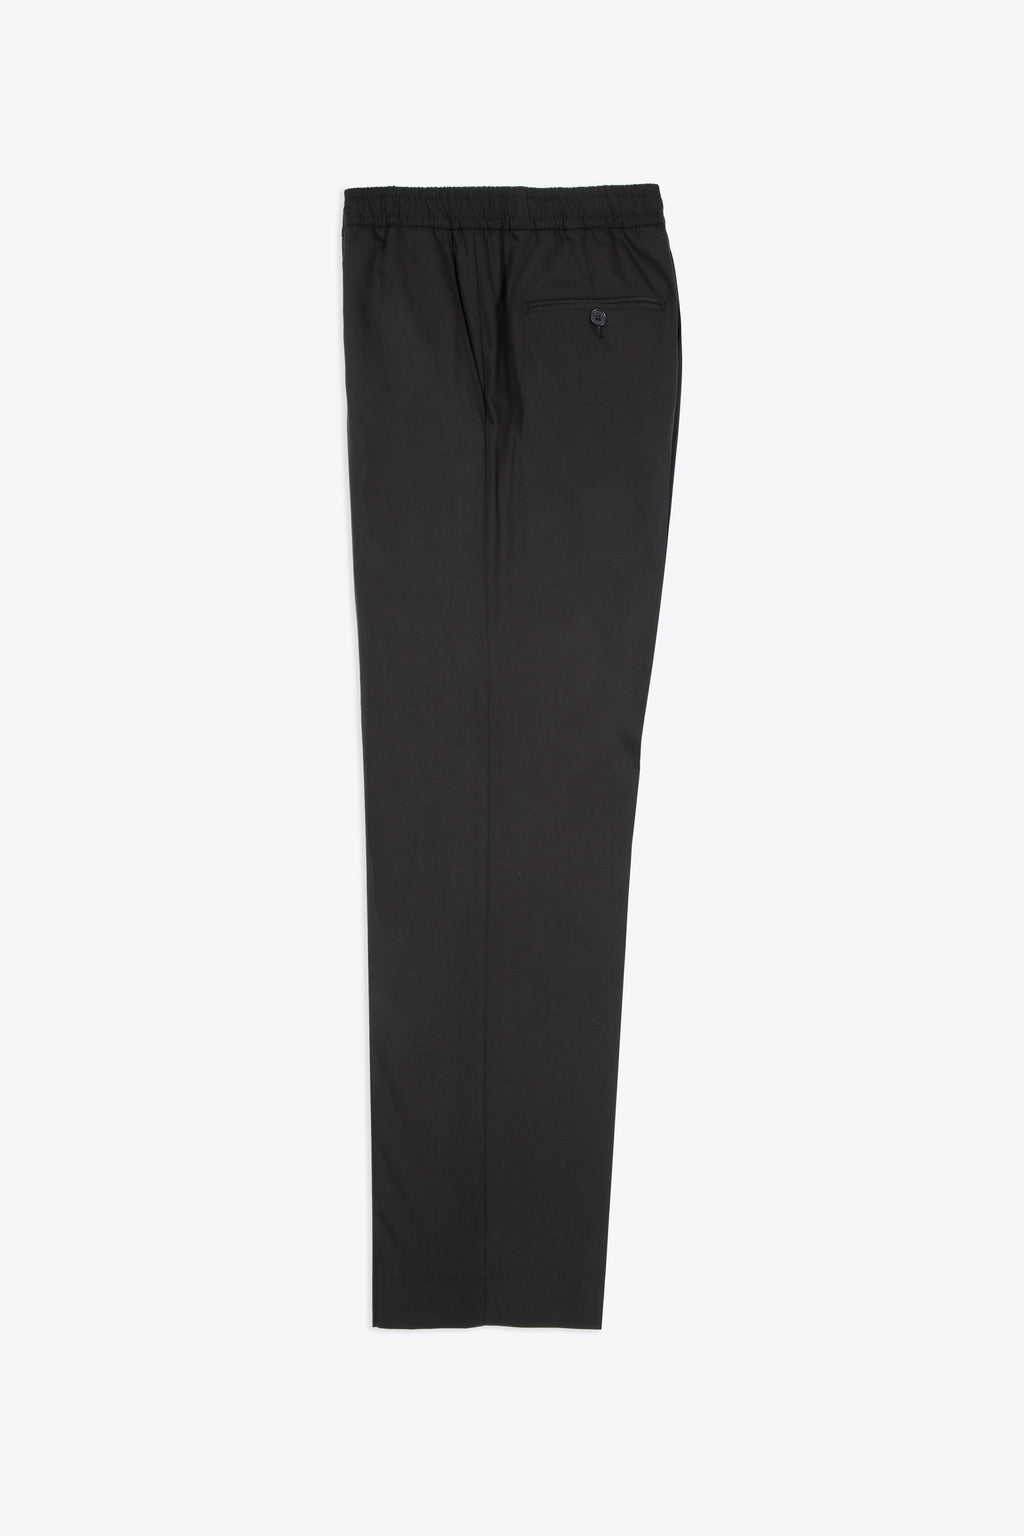 alt-image__Black-cotton-relaxed-pant-with-elastic-waistband